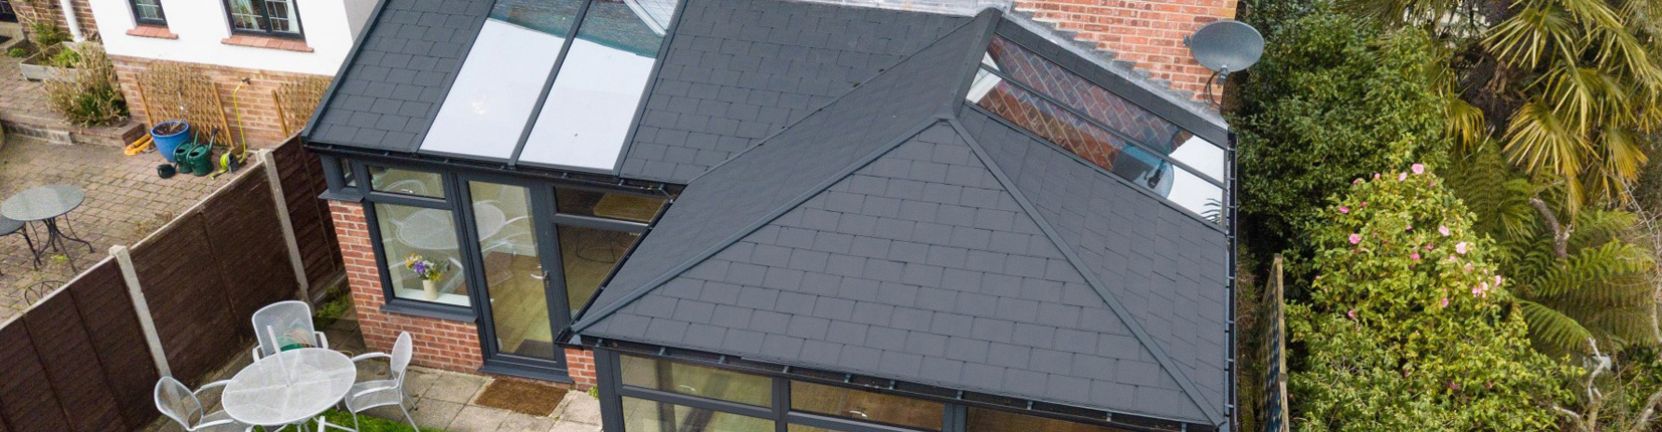 Transform Your Conservatory With a Modern Tiled Roof